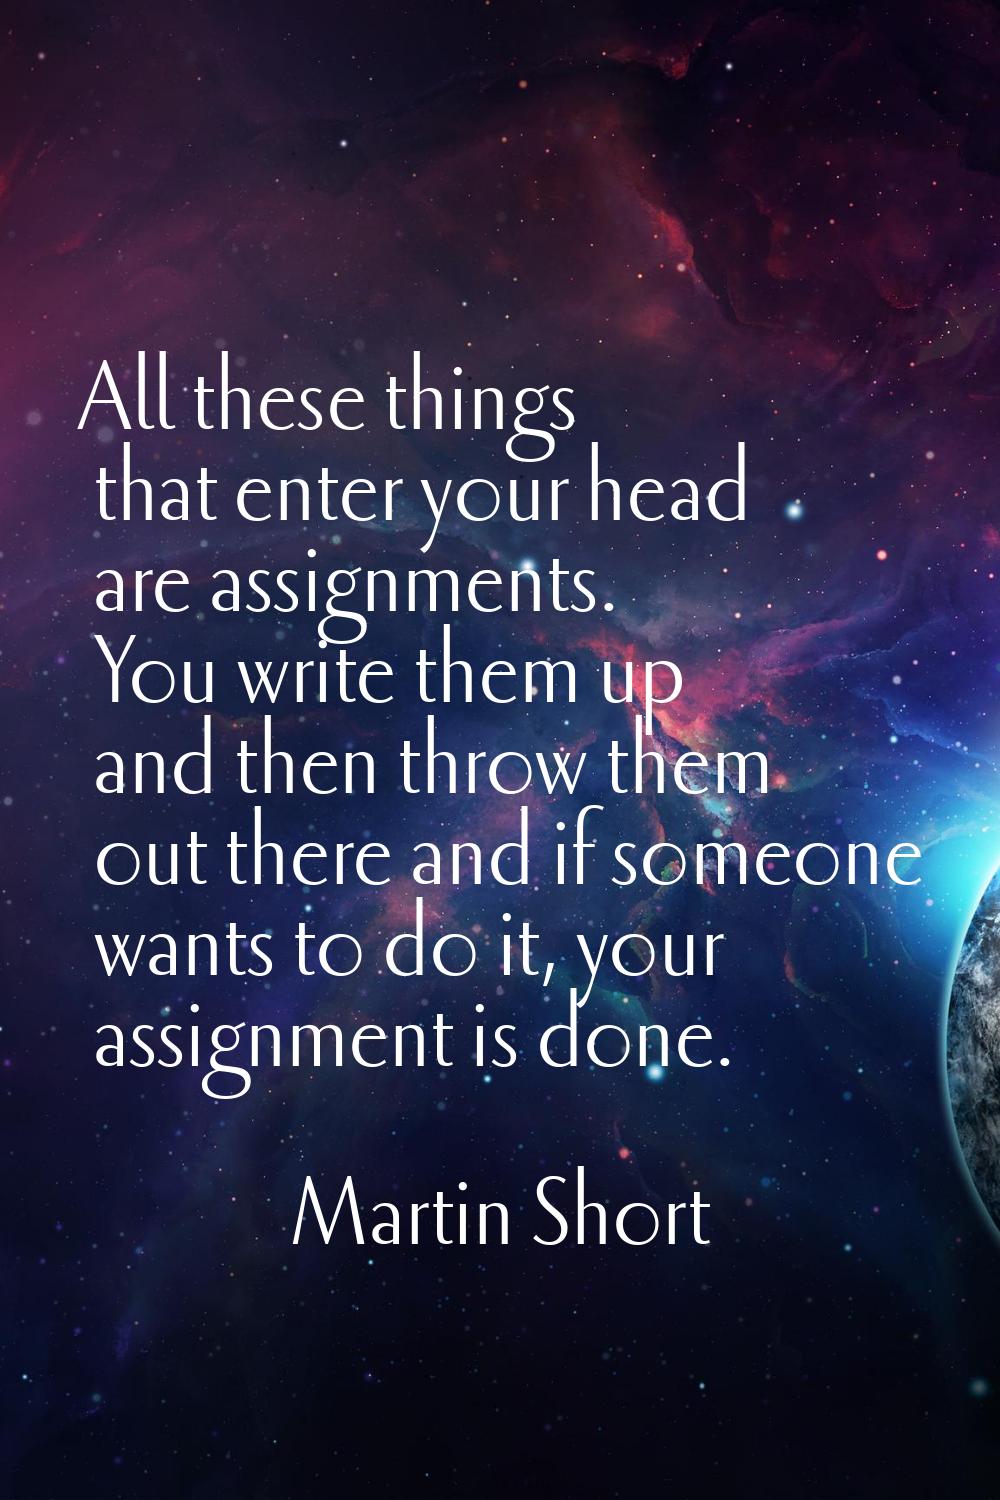 All these things that enter your head are assignments. You write them up and then throw them out th